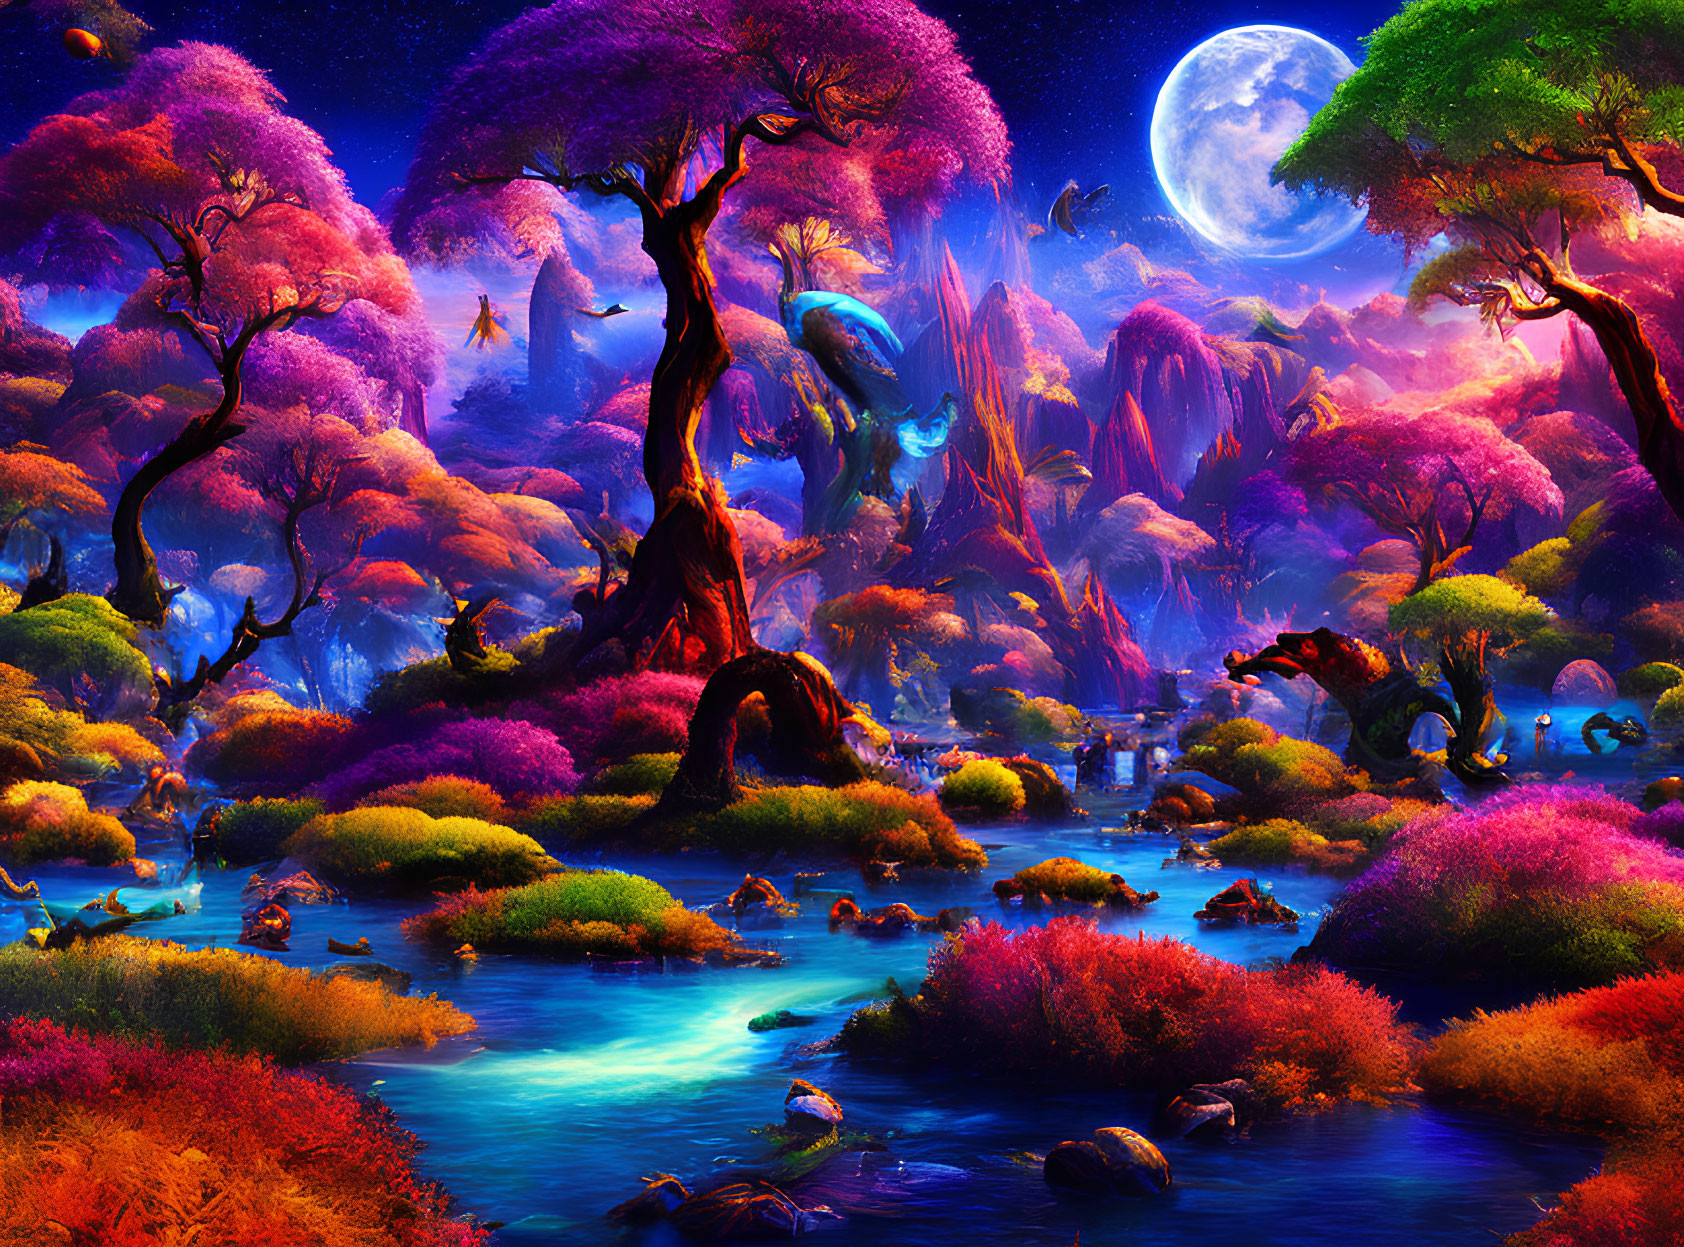 Colorful Fantasy Landscape with Full Moon, Starry Sky, and Serene River